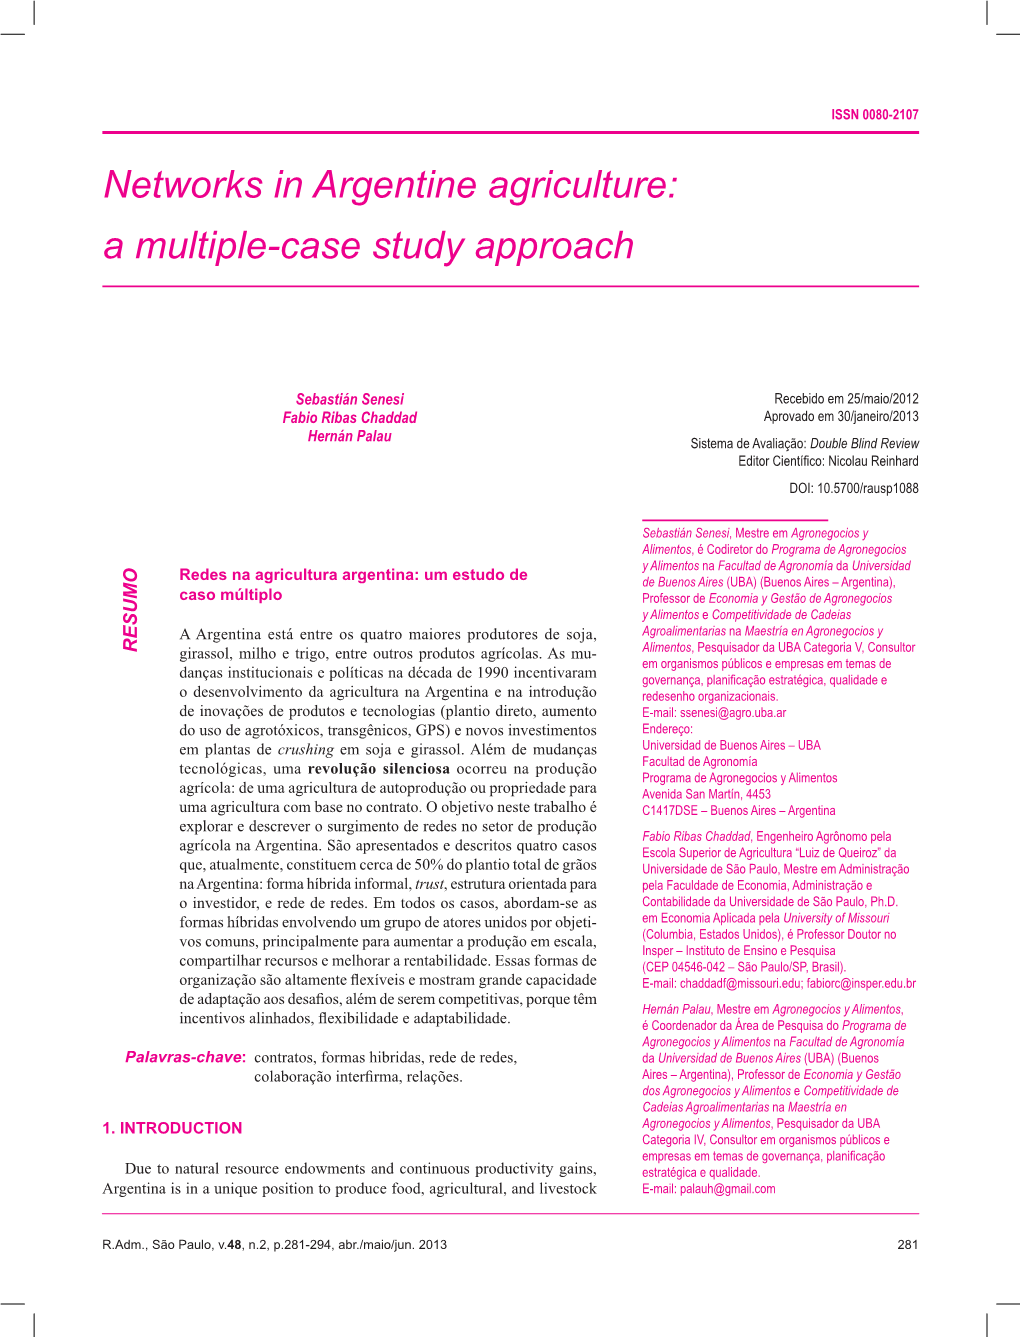 Networks in Argentine Agriculture: a Multiple-Case Study Approach